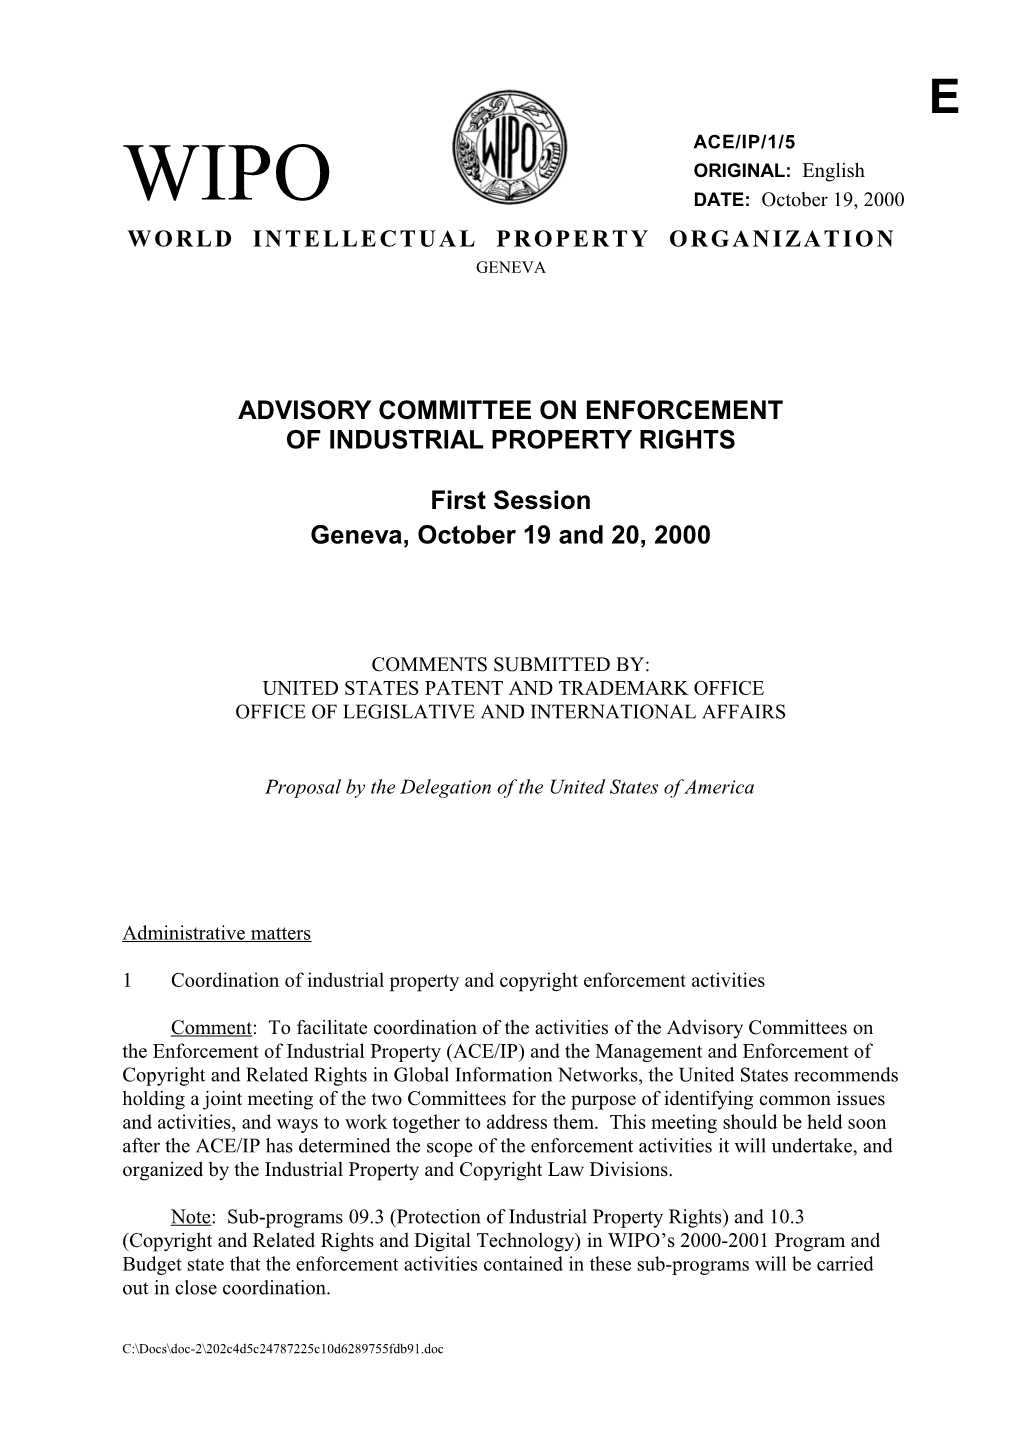 ACE/IP/1/5: Comments Submitted By: United States Patent and Trademark Office, Office Of